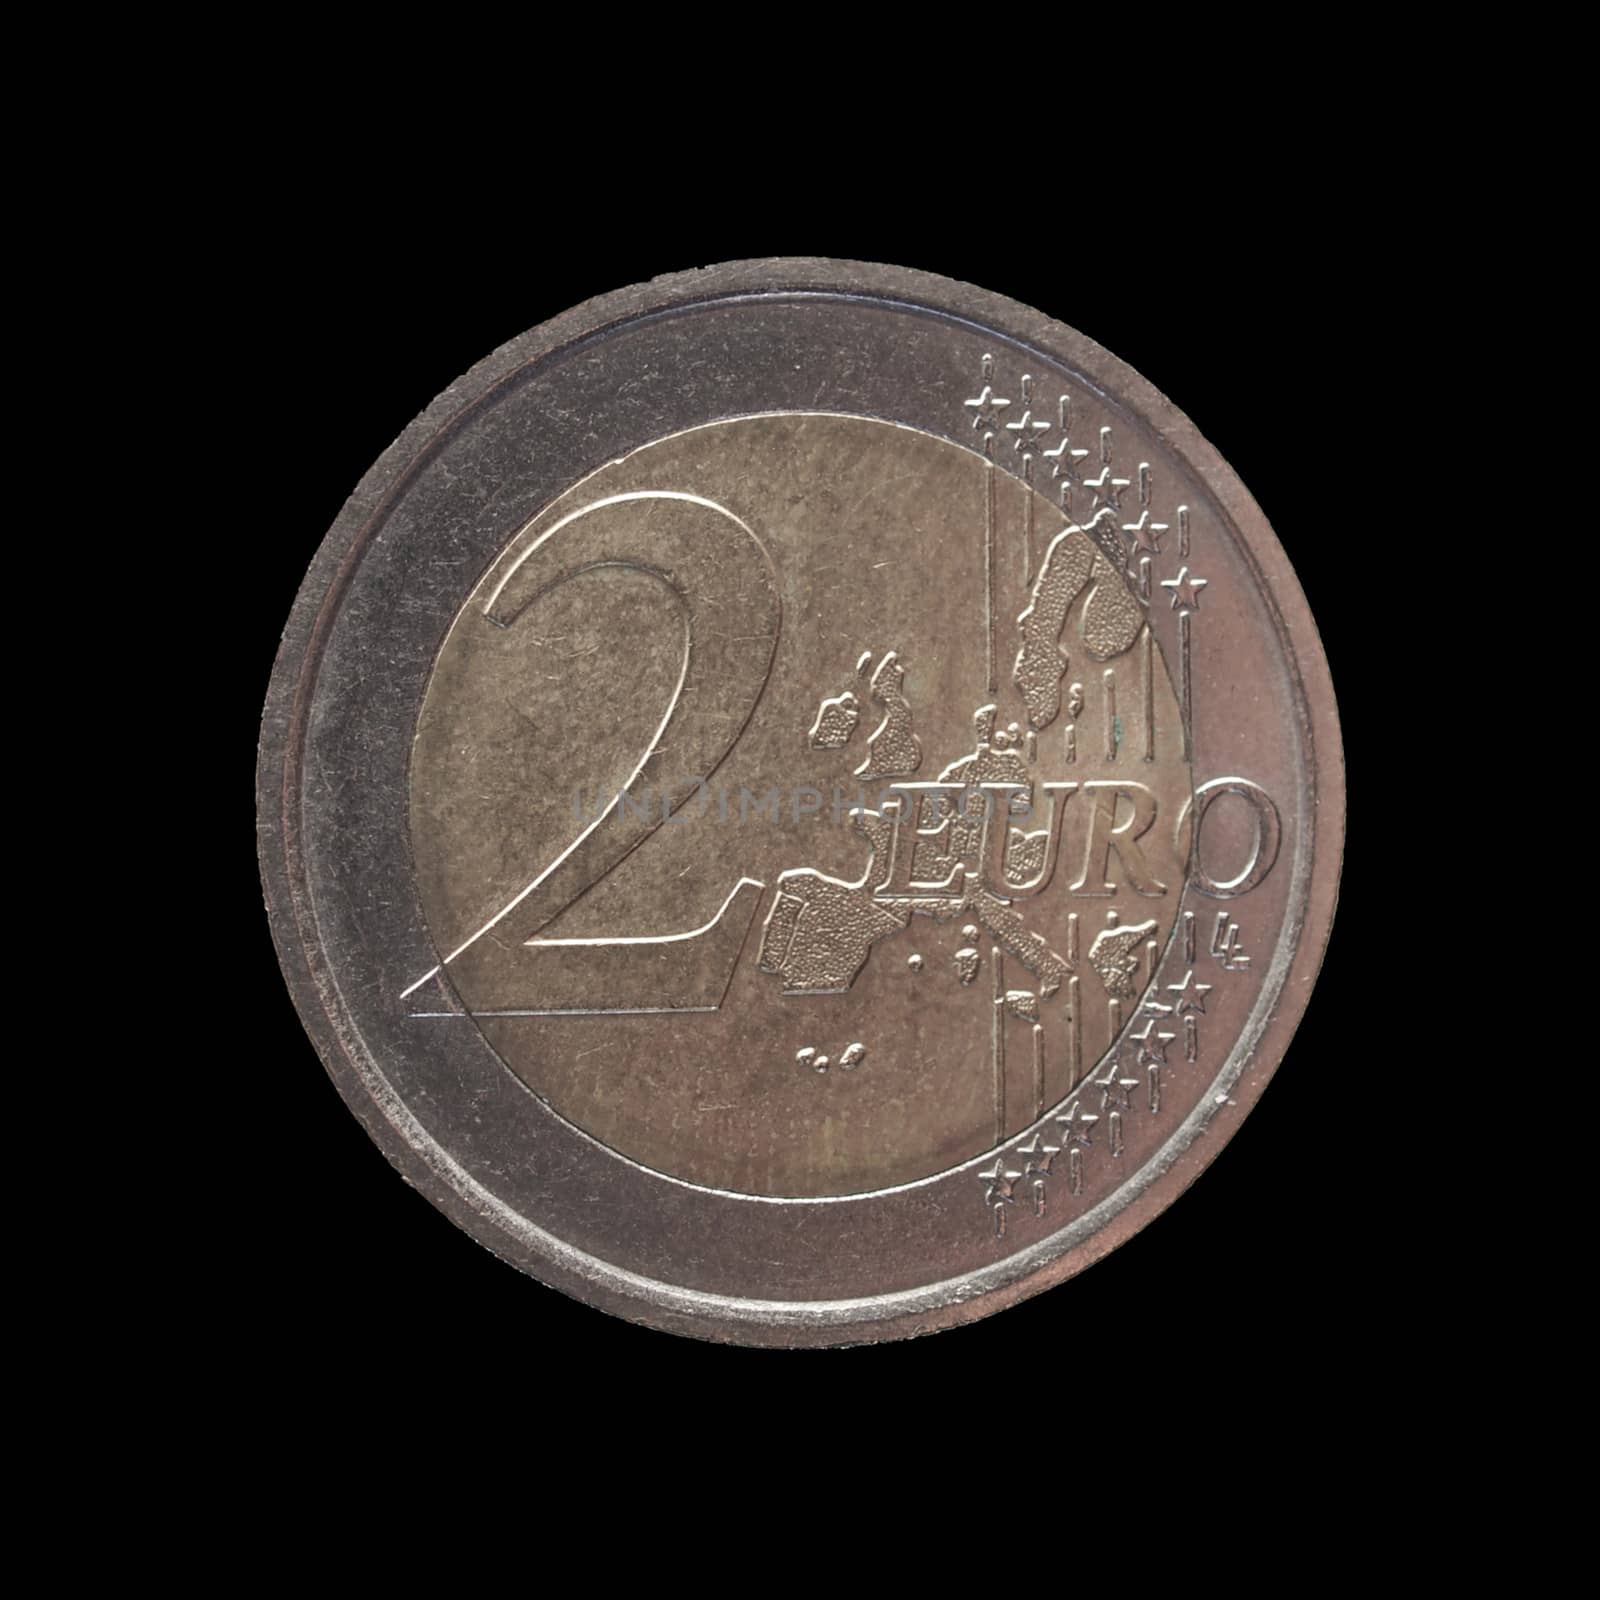 Two Euro coin currency of the European Union